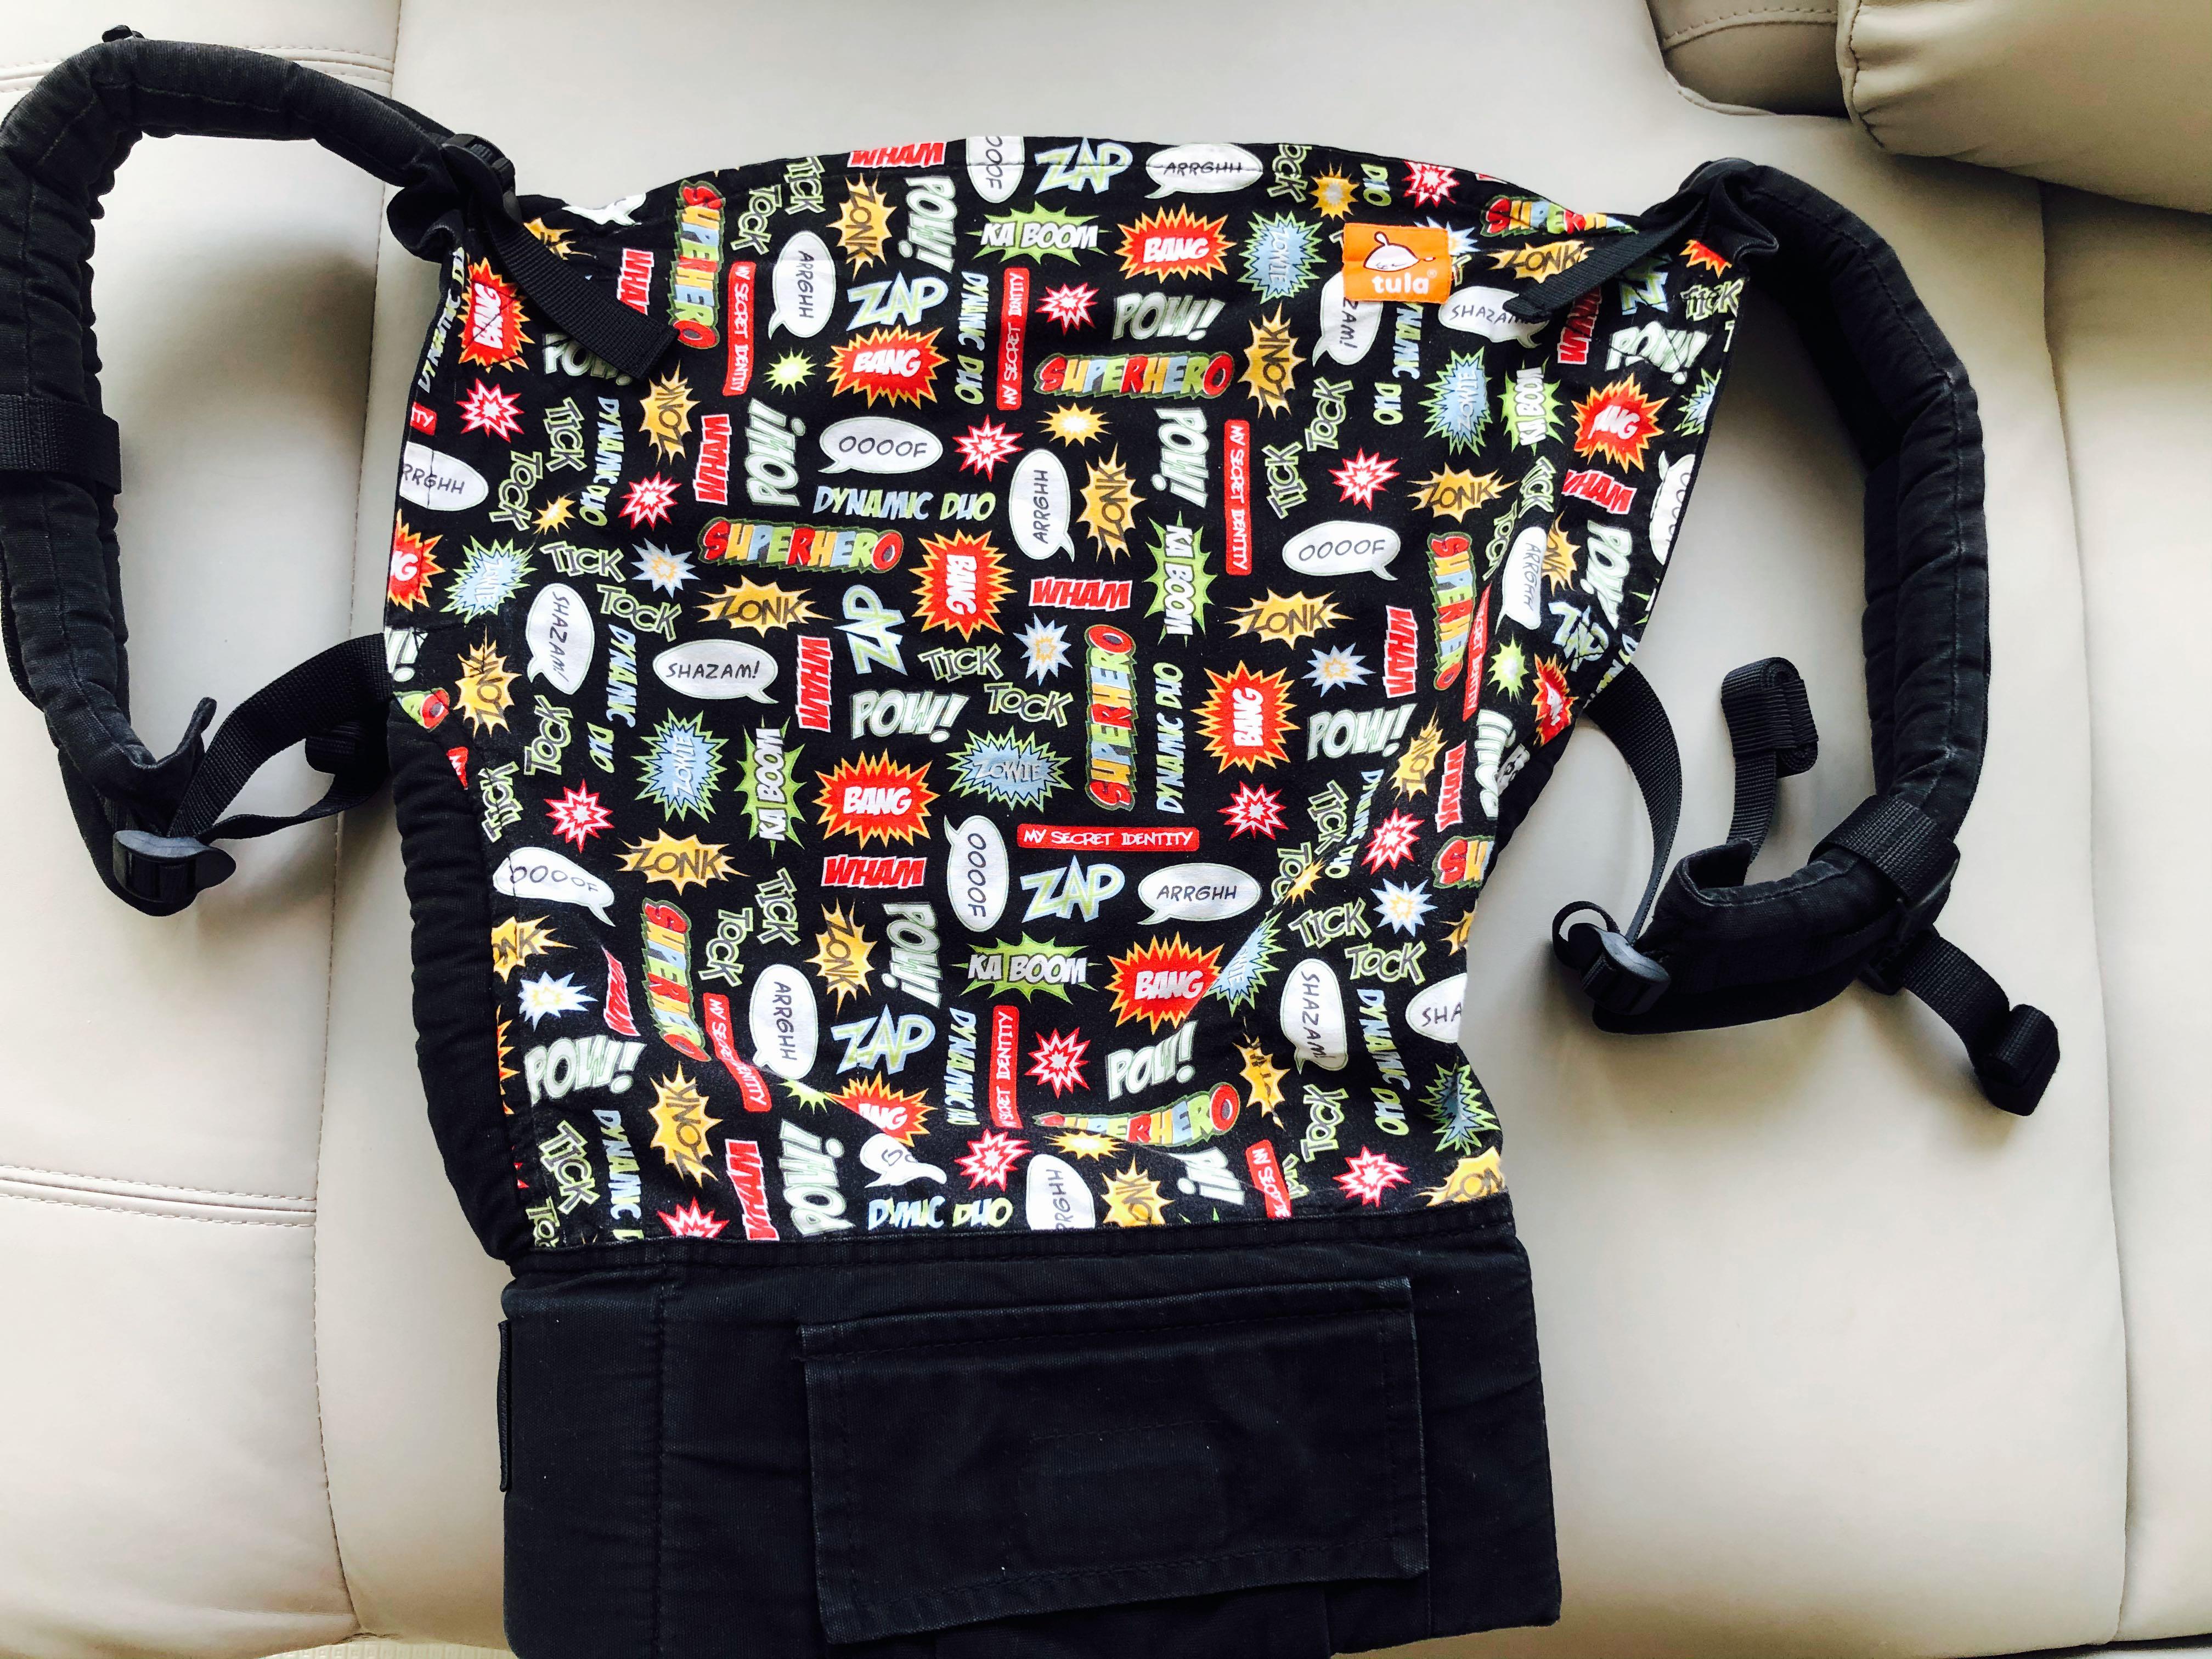 used tula baby carrier for sale